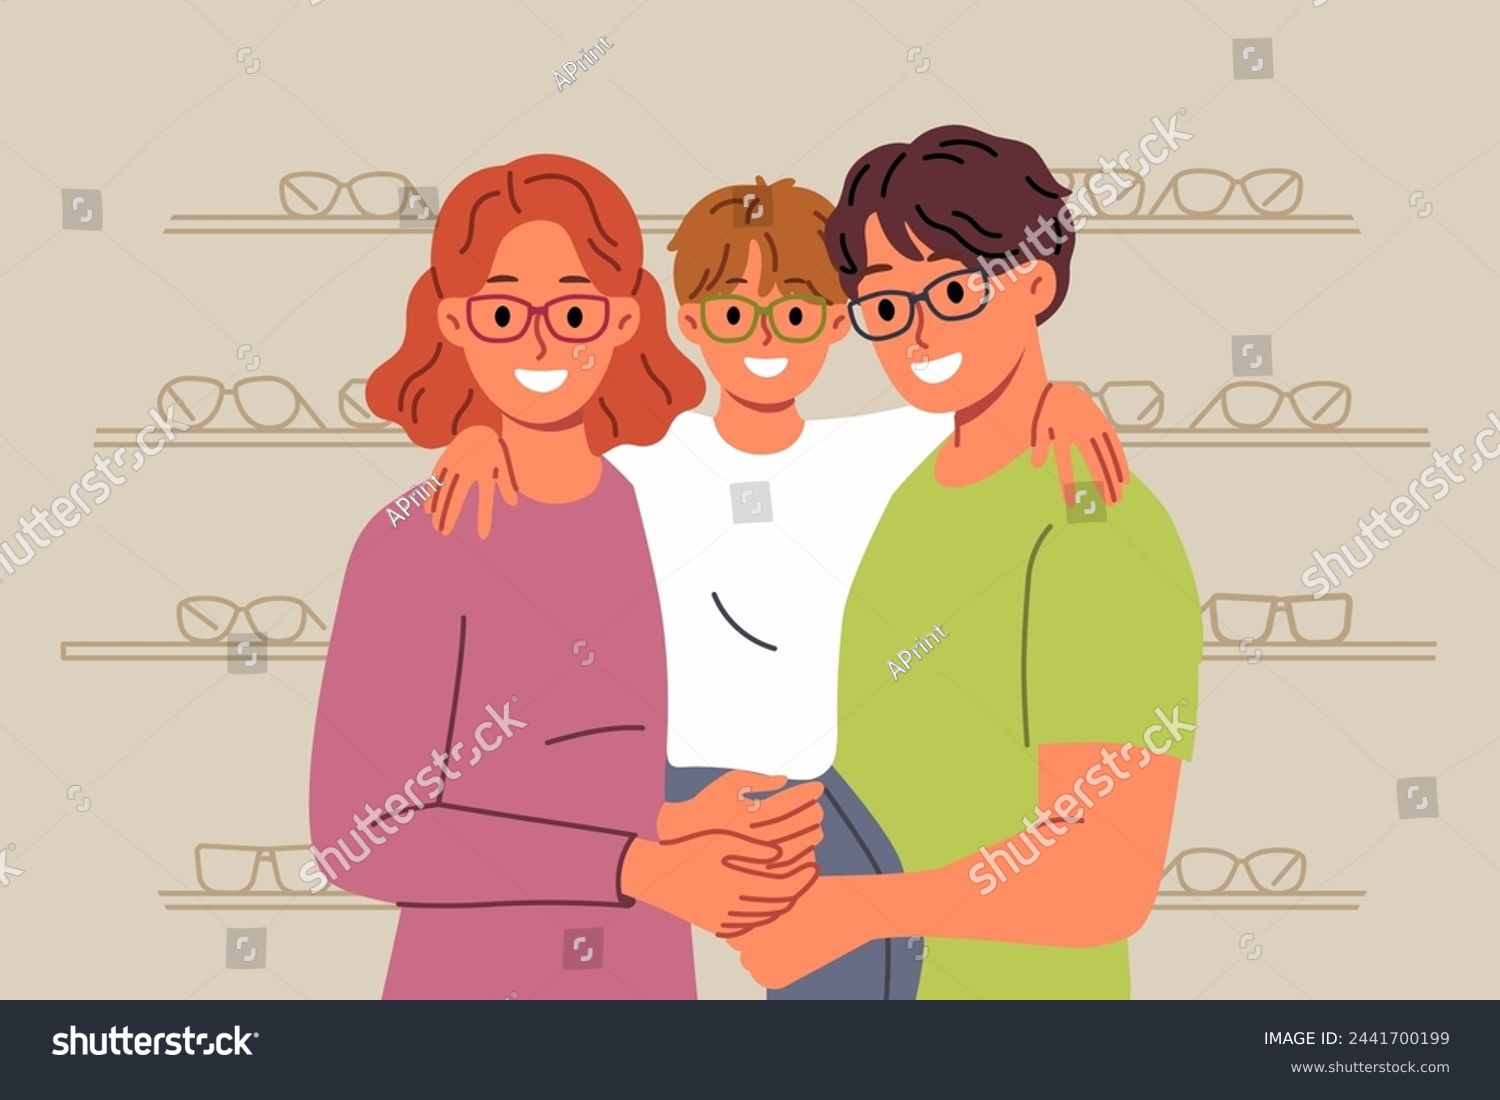 SVG of Family chooses new glasses for son, standing in ophthalmological store with happy boy in arms. Positive mom and dad use ophthalmological services to correct poor vision in little child svg